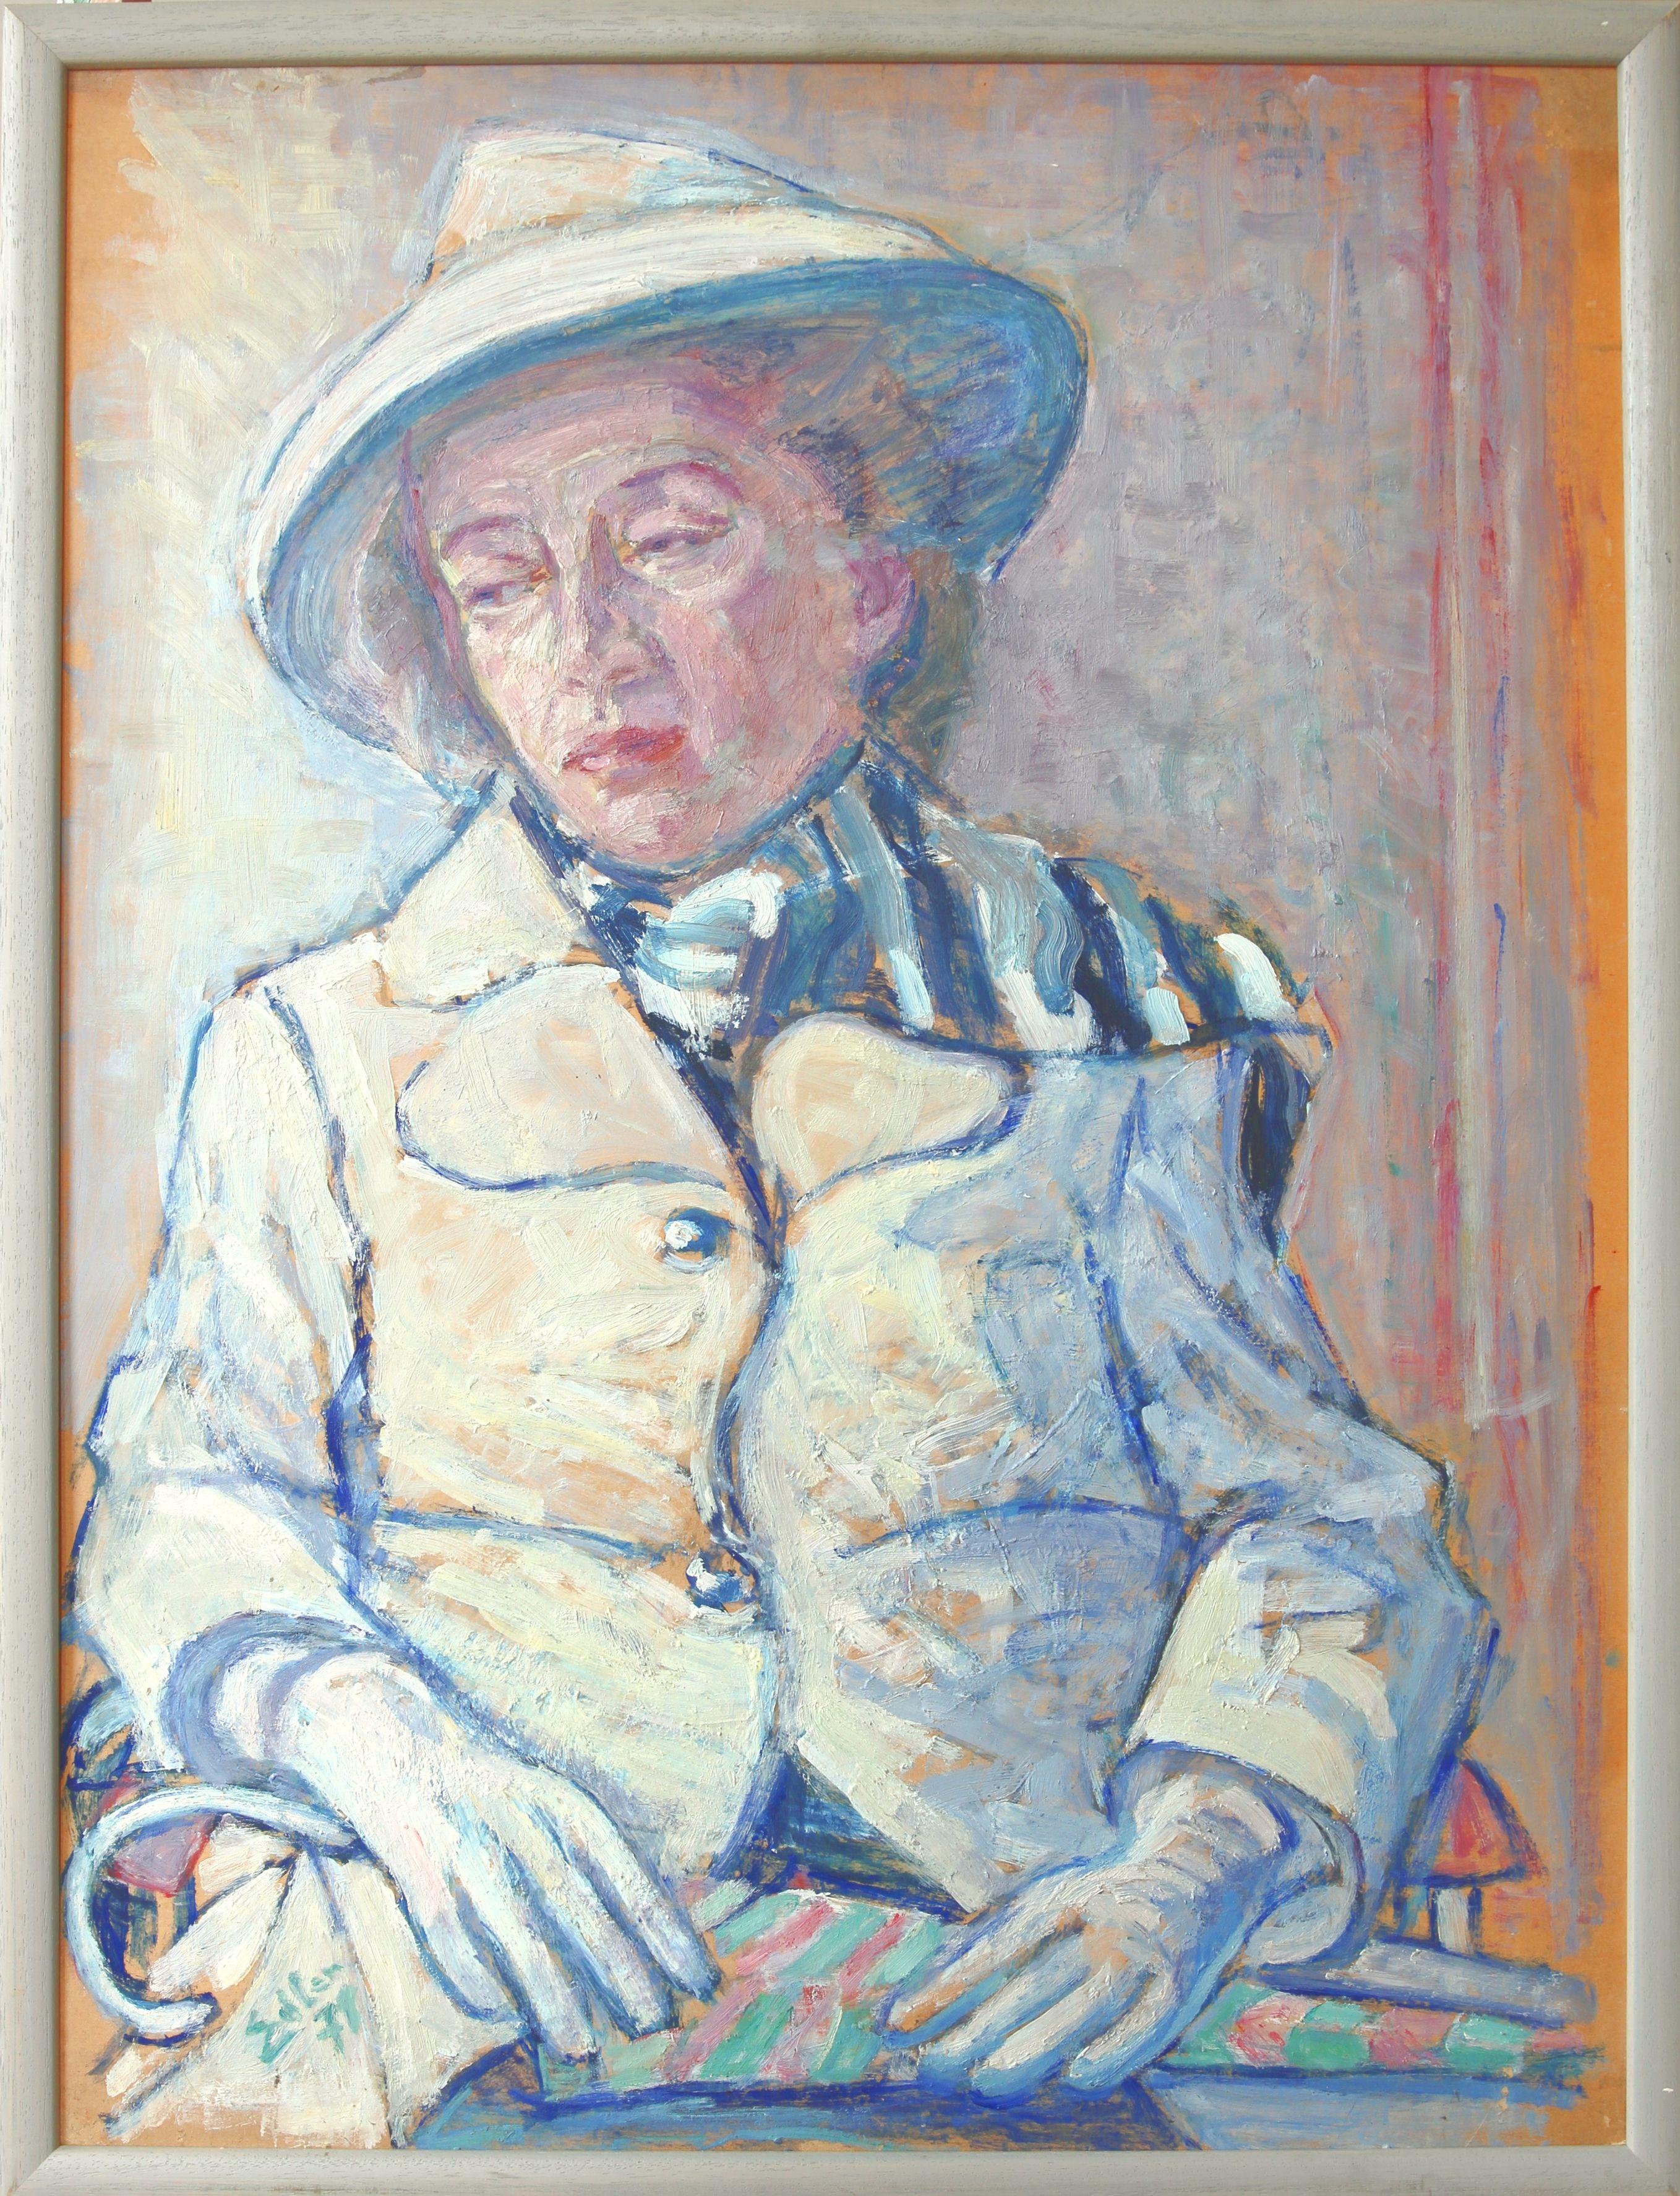 Oil paint on cardboard 1971 by Fritz Edler, Germany ( 1894-1994 ). Signed and dated lower left: Edler 71
Verso portrait of a young woman. Estate stamps on top- and lower right. Framed. 
Dimensions; Height 29.65 in ( 75,3 cm ), Width: 21.73 in ( 55,2